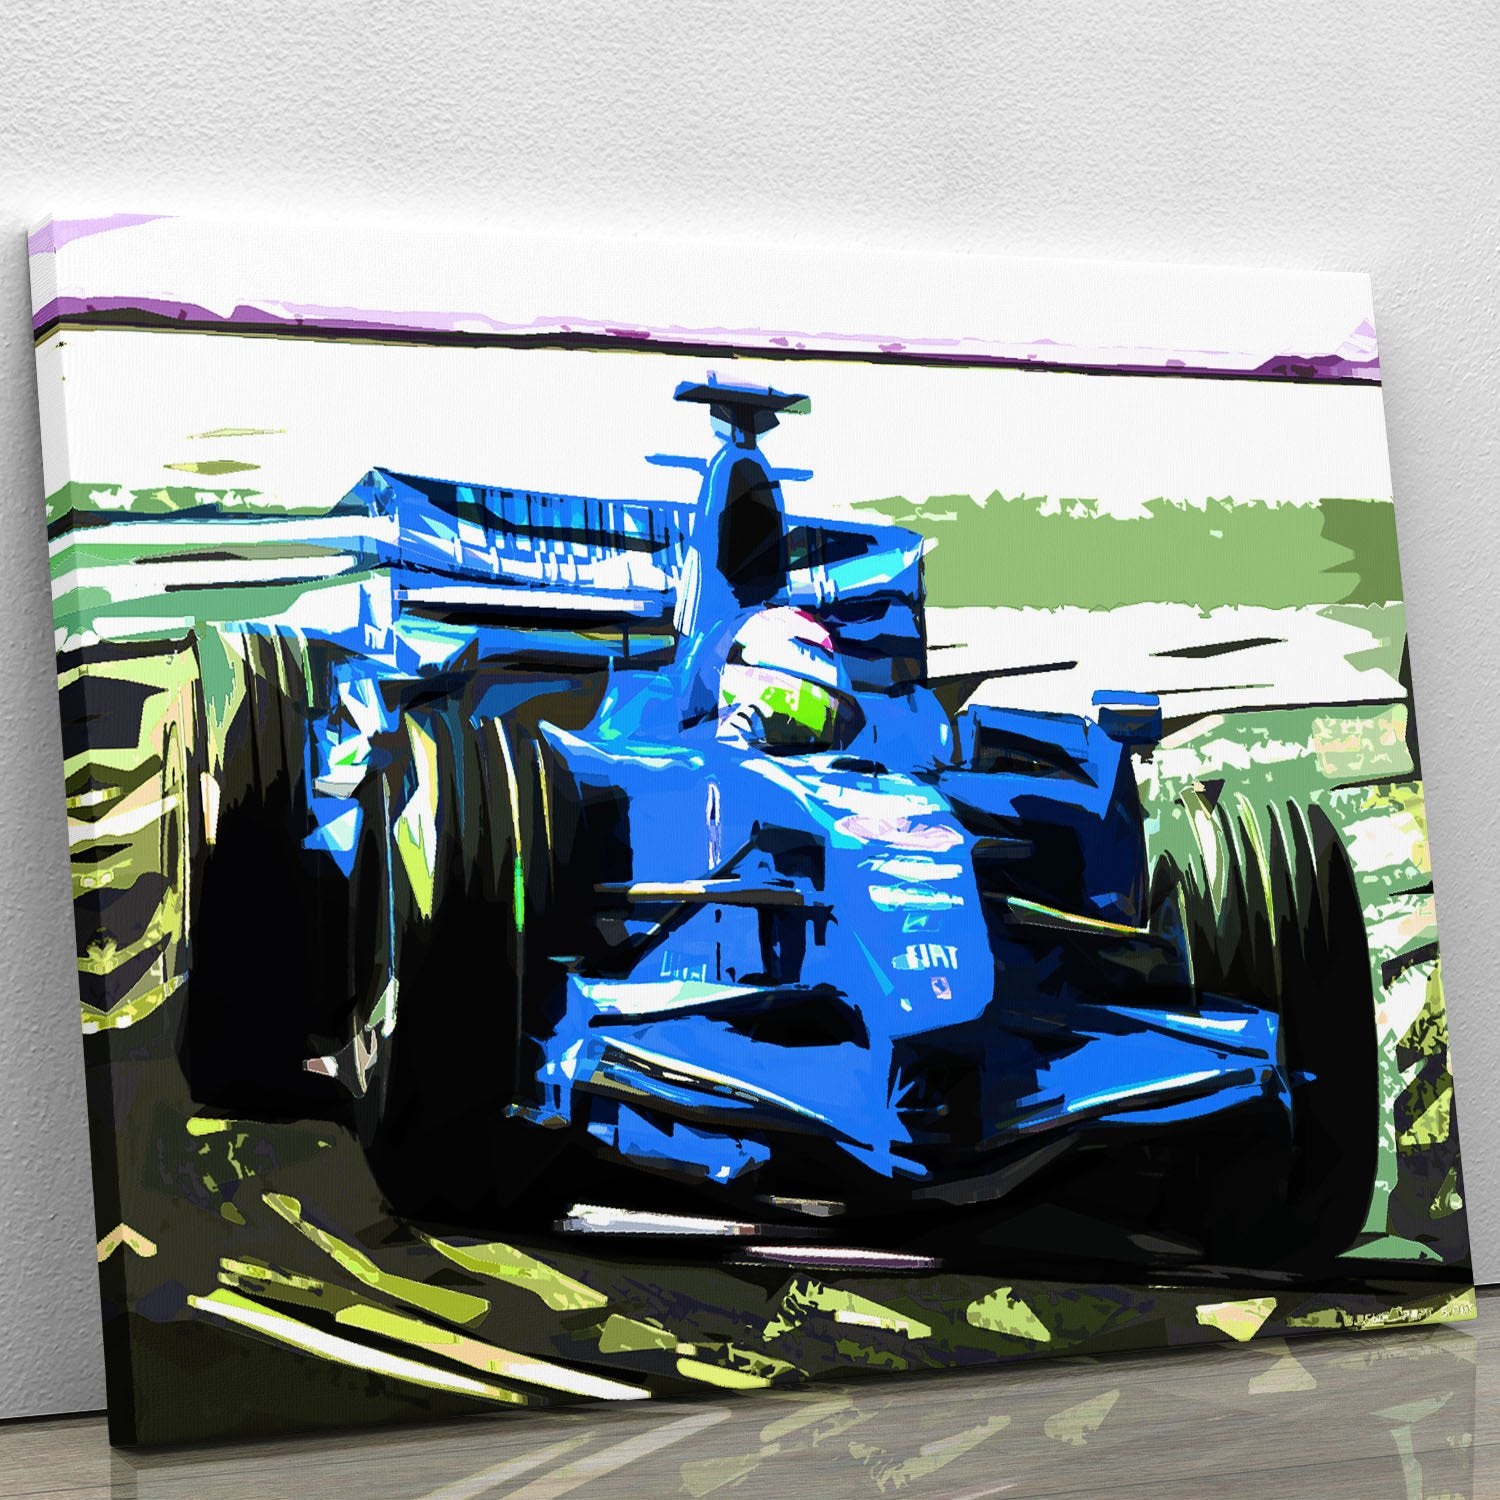 Formula One Racing Car Canvas Print or Poster